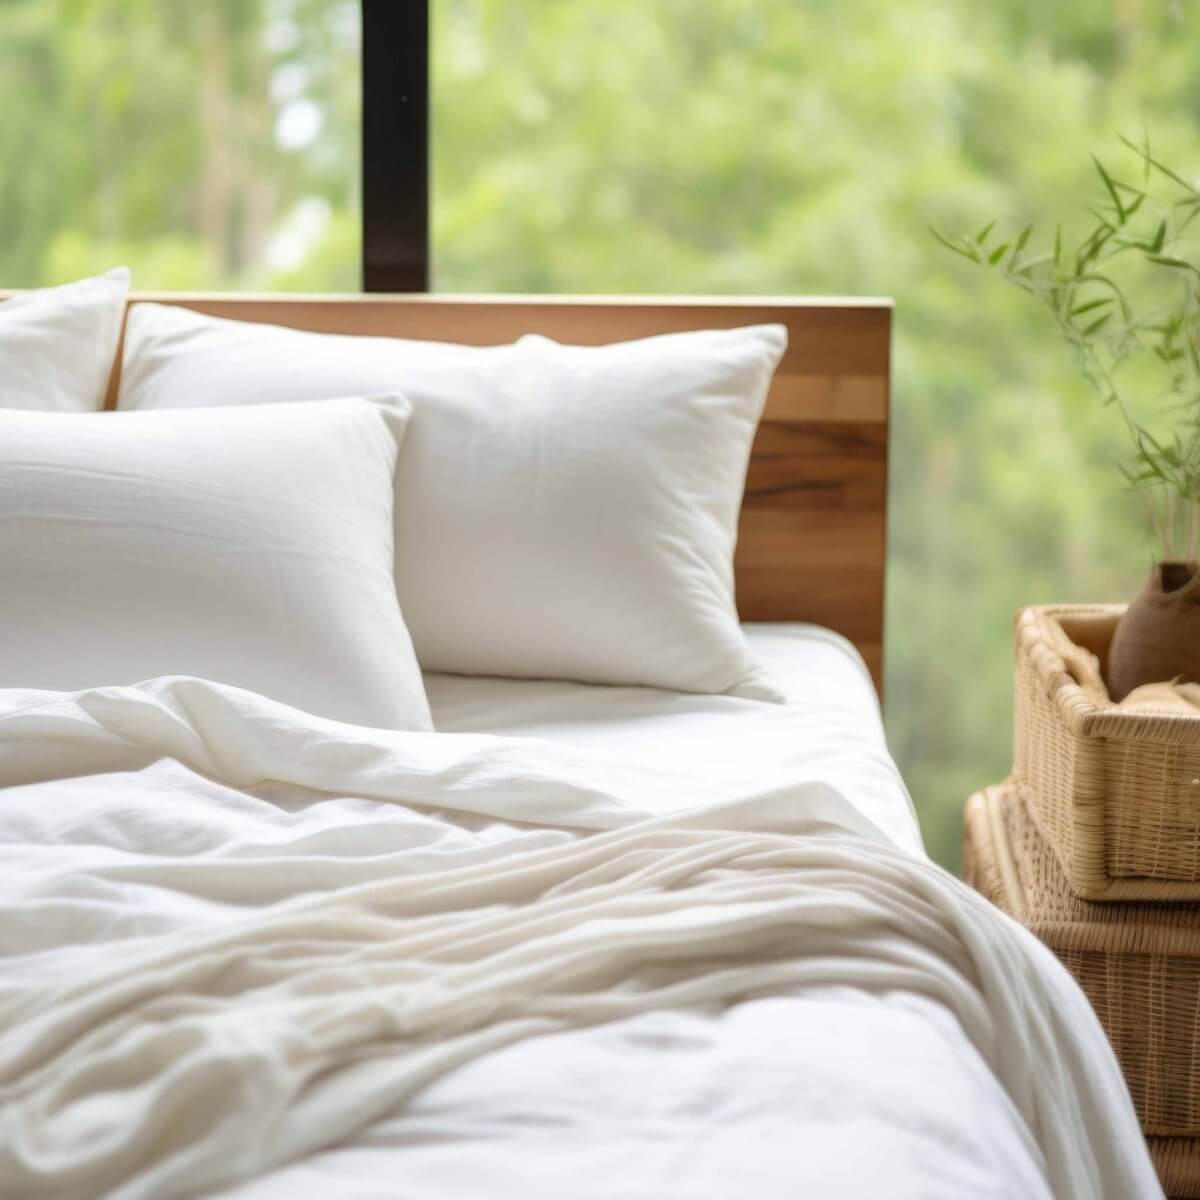 Organic Sleep: What to Know About Its Regenerative Benefits